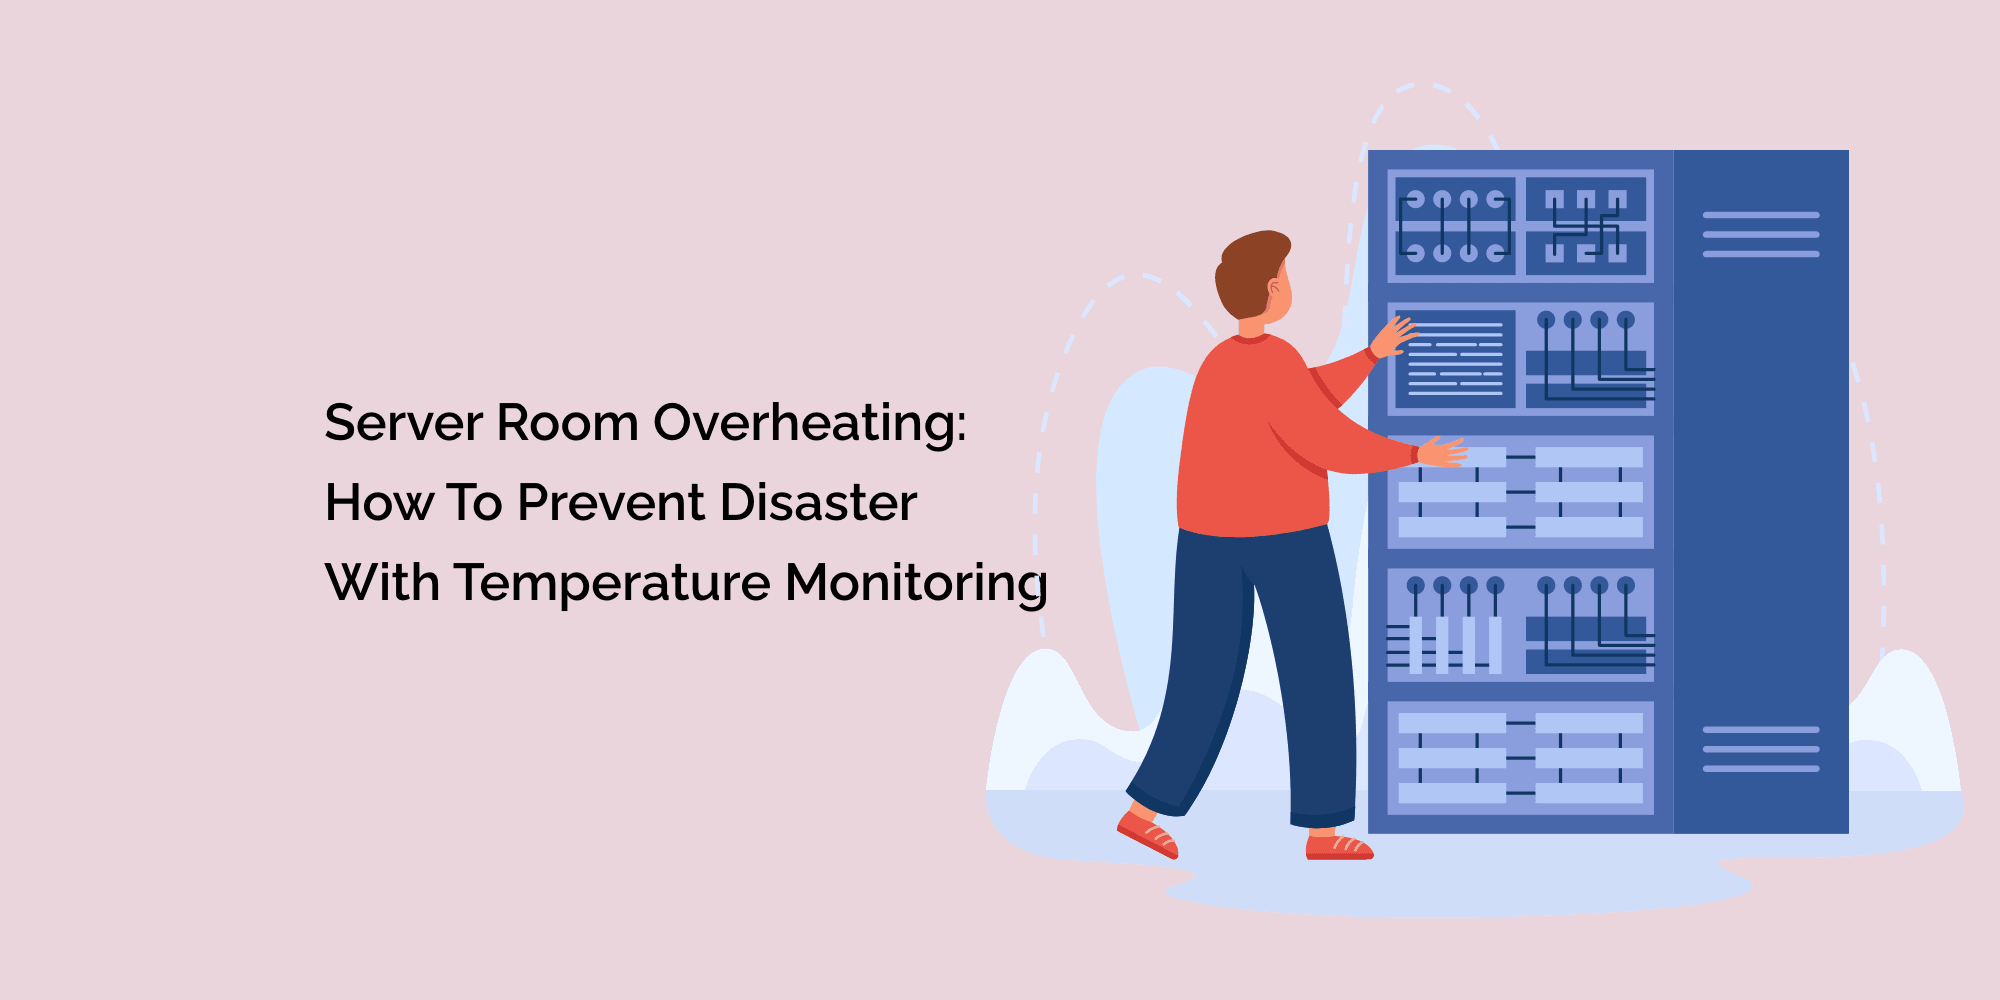 Server Room Overheating: How to Prevent Disaster with Temperature Monitoring